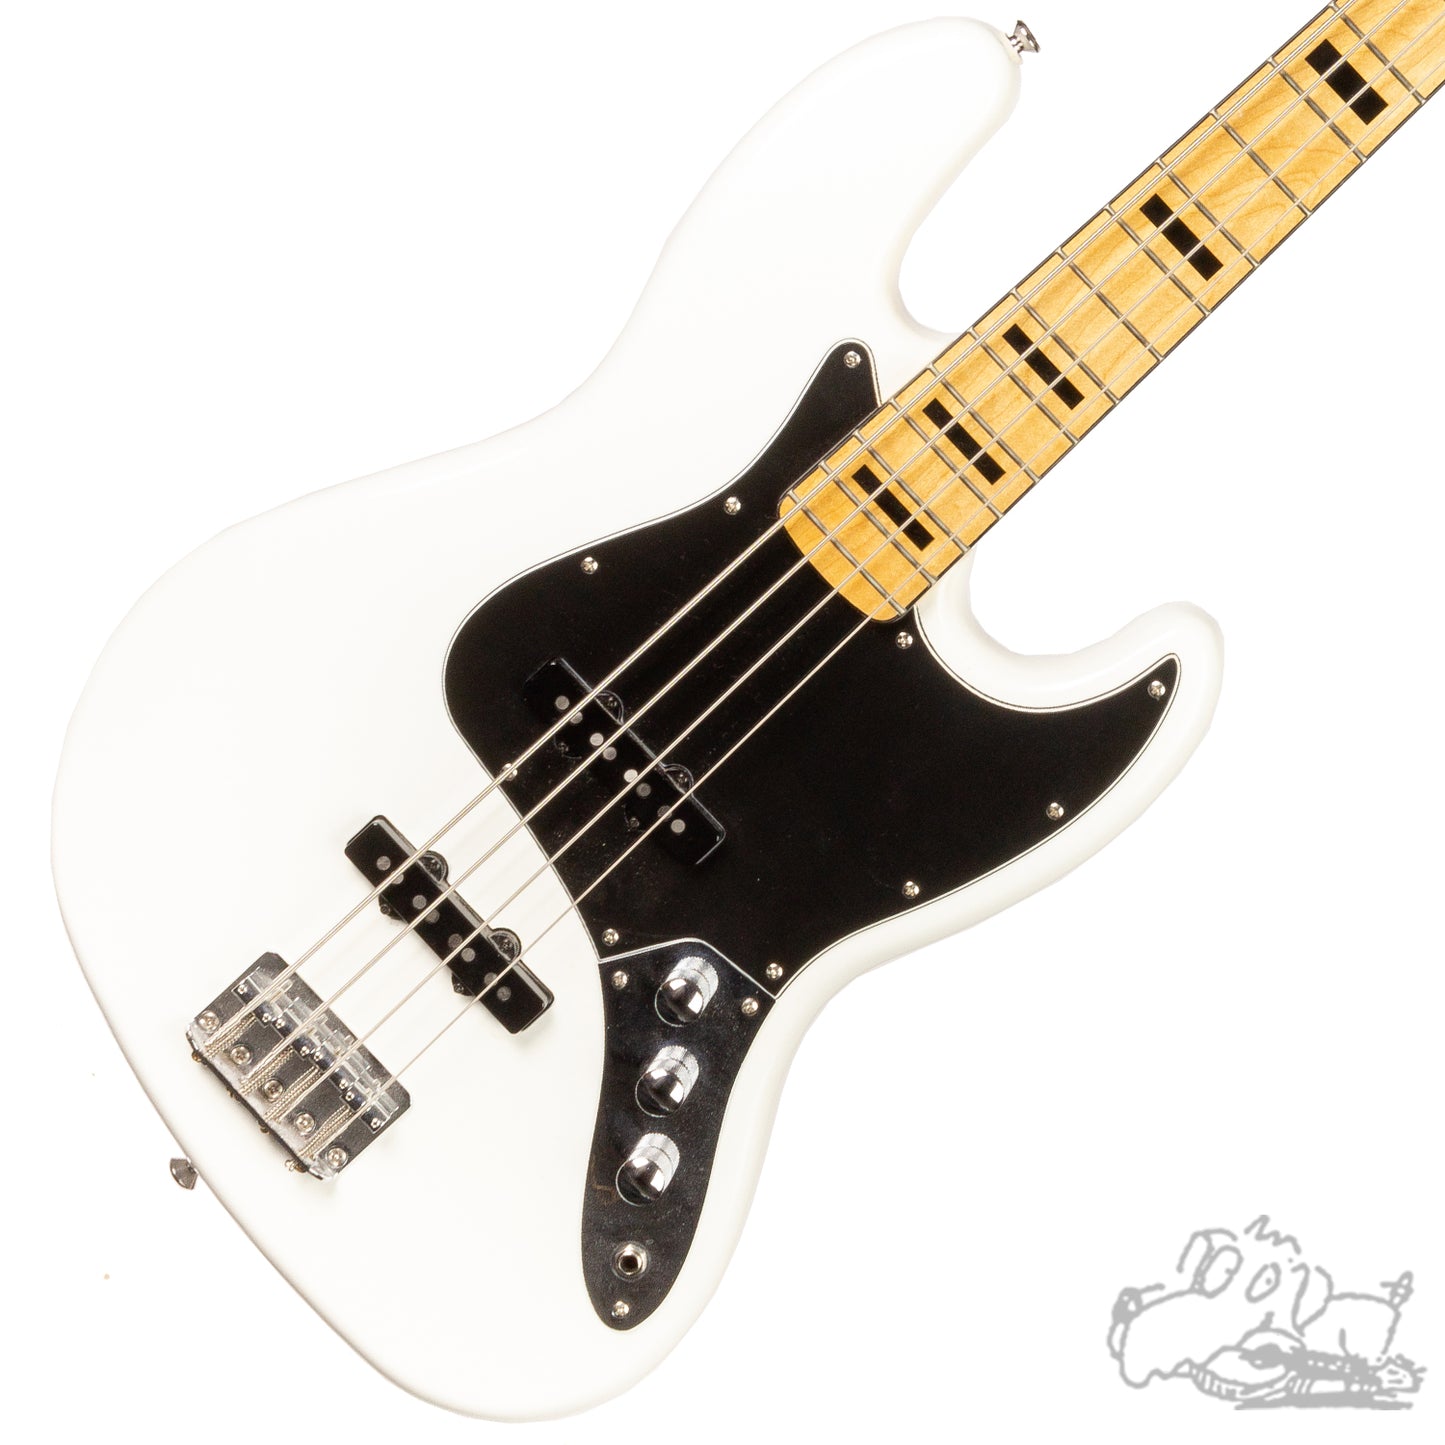 2013 Squier Jazz Bass - Used